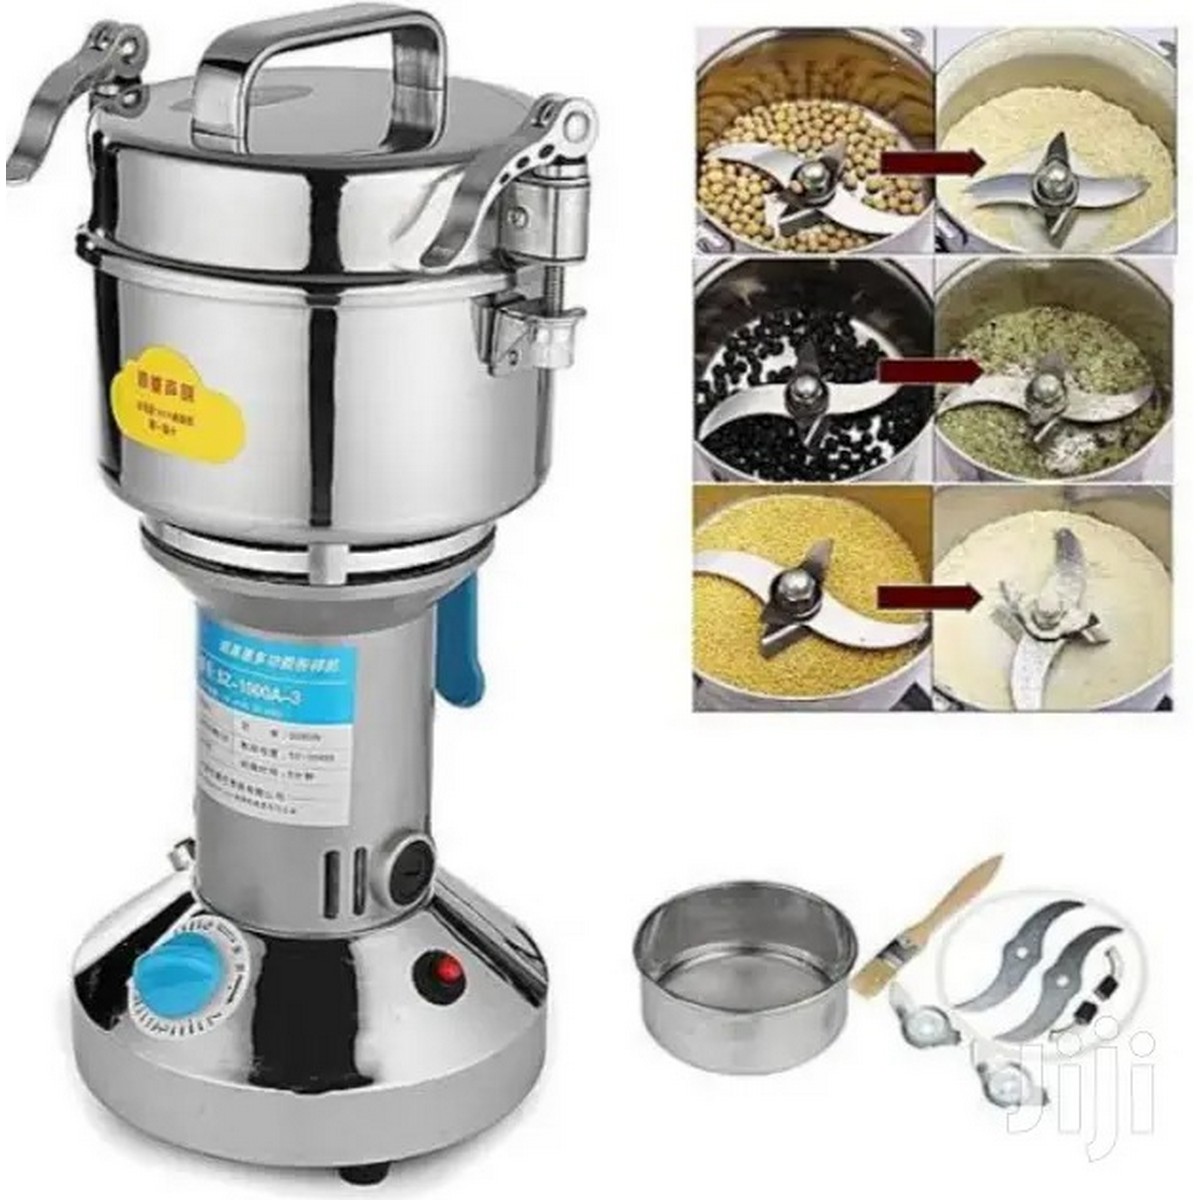 Silver Crest Electric Powerful Powder/Cereal Grinder - All Metal